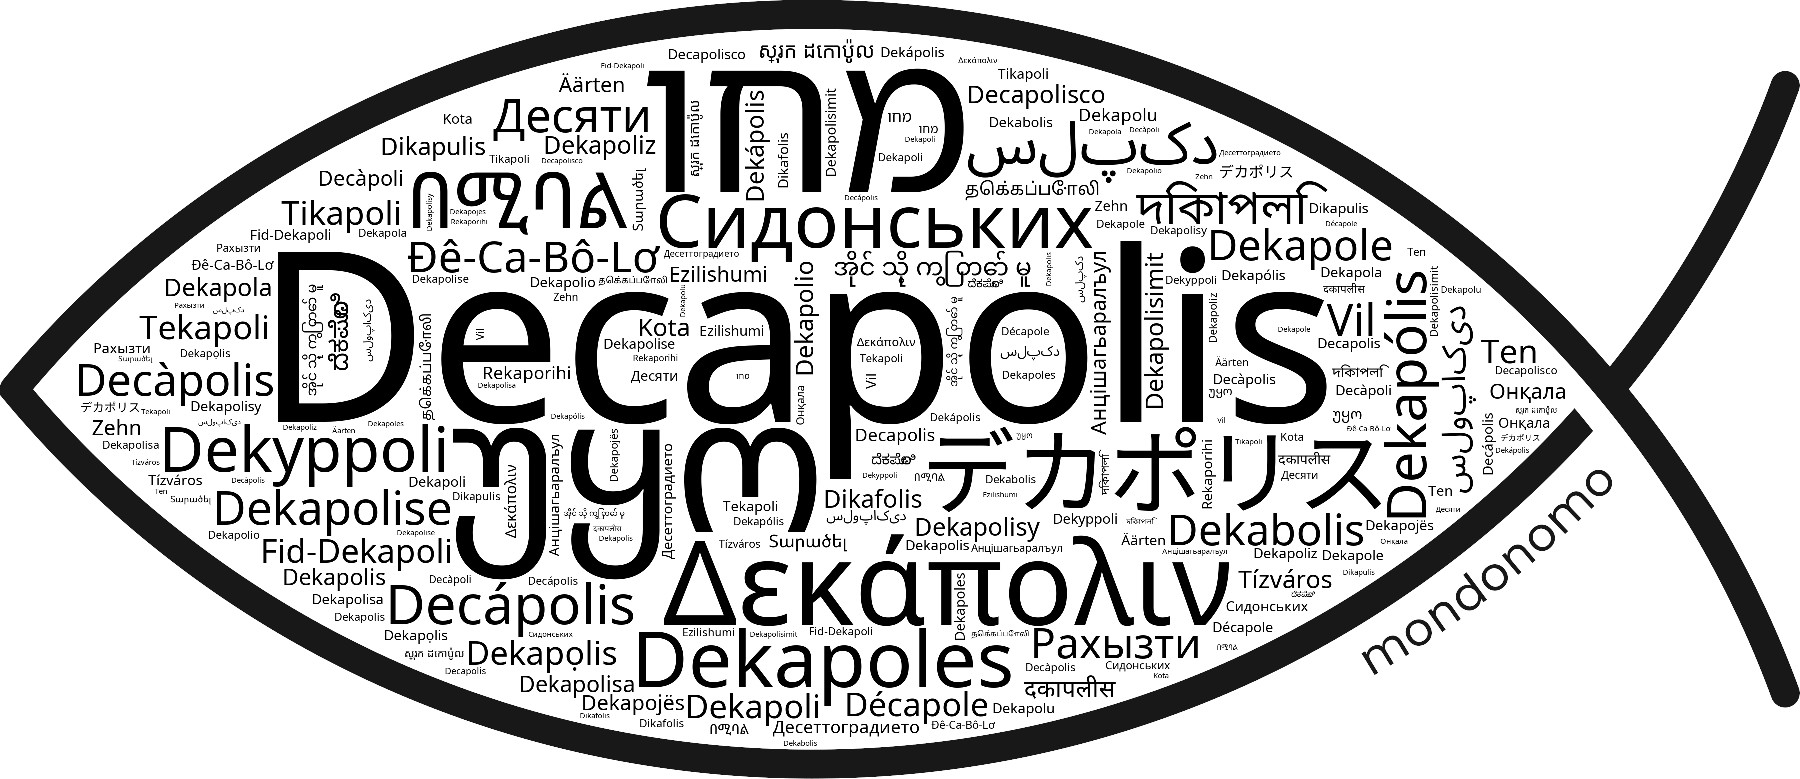 Name Decapolis in the world's Bibles